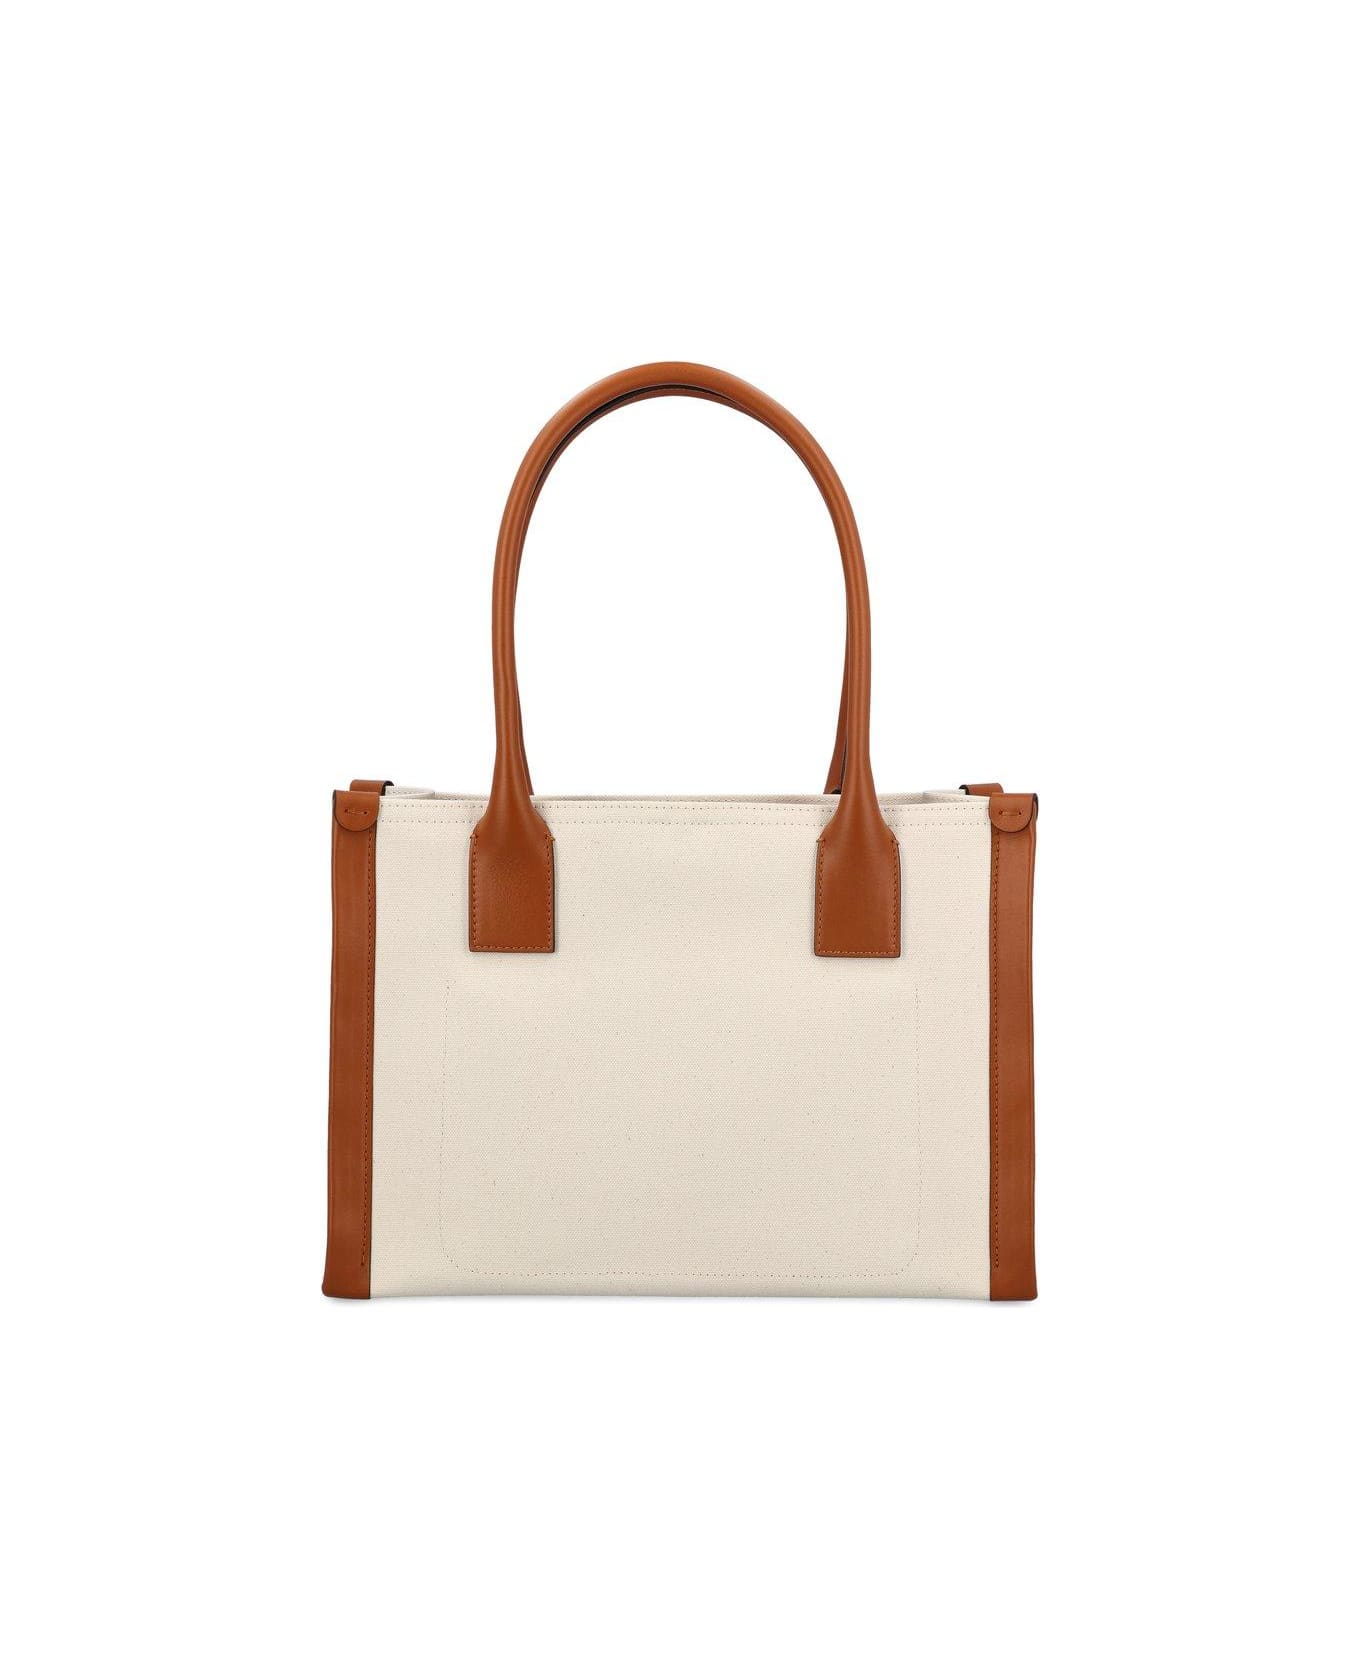 Christian Louboutin By My Side Small Shoulder Bag - Natural/cuoio